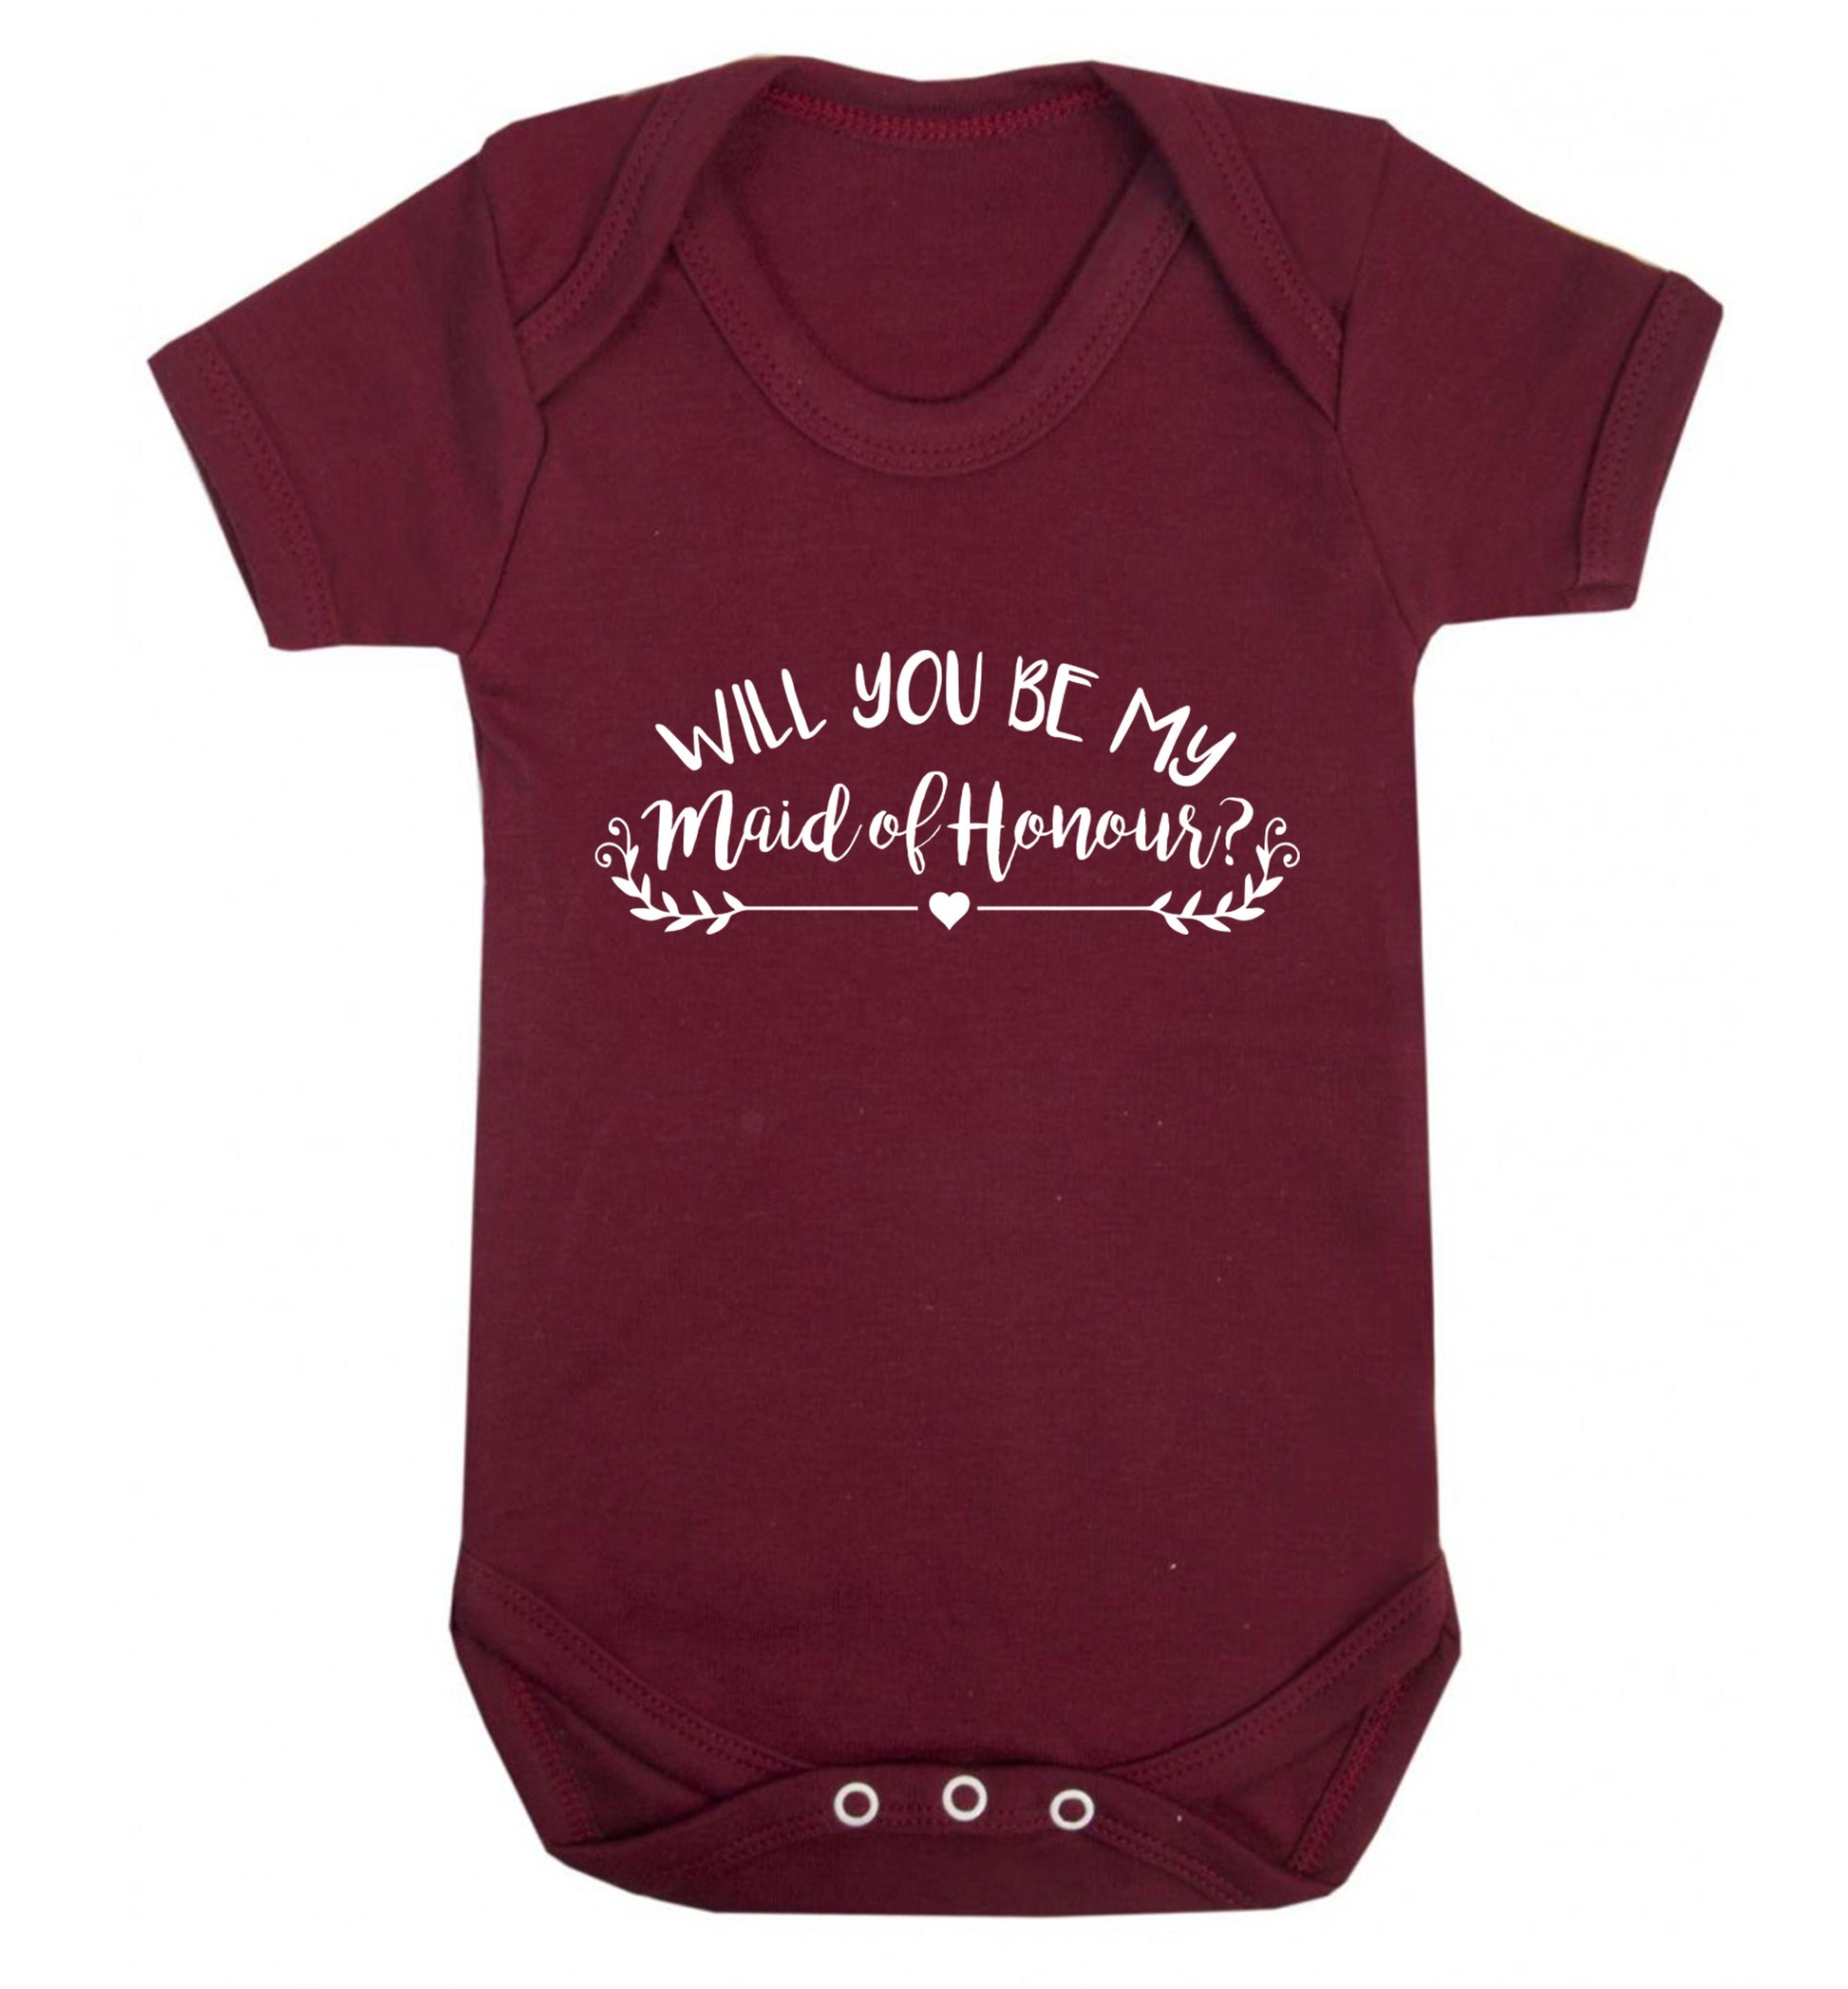 Will you be my maid of honour? Baby Vest maroon 18-24 months